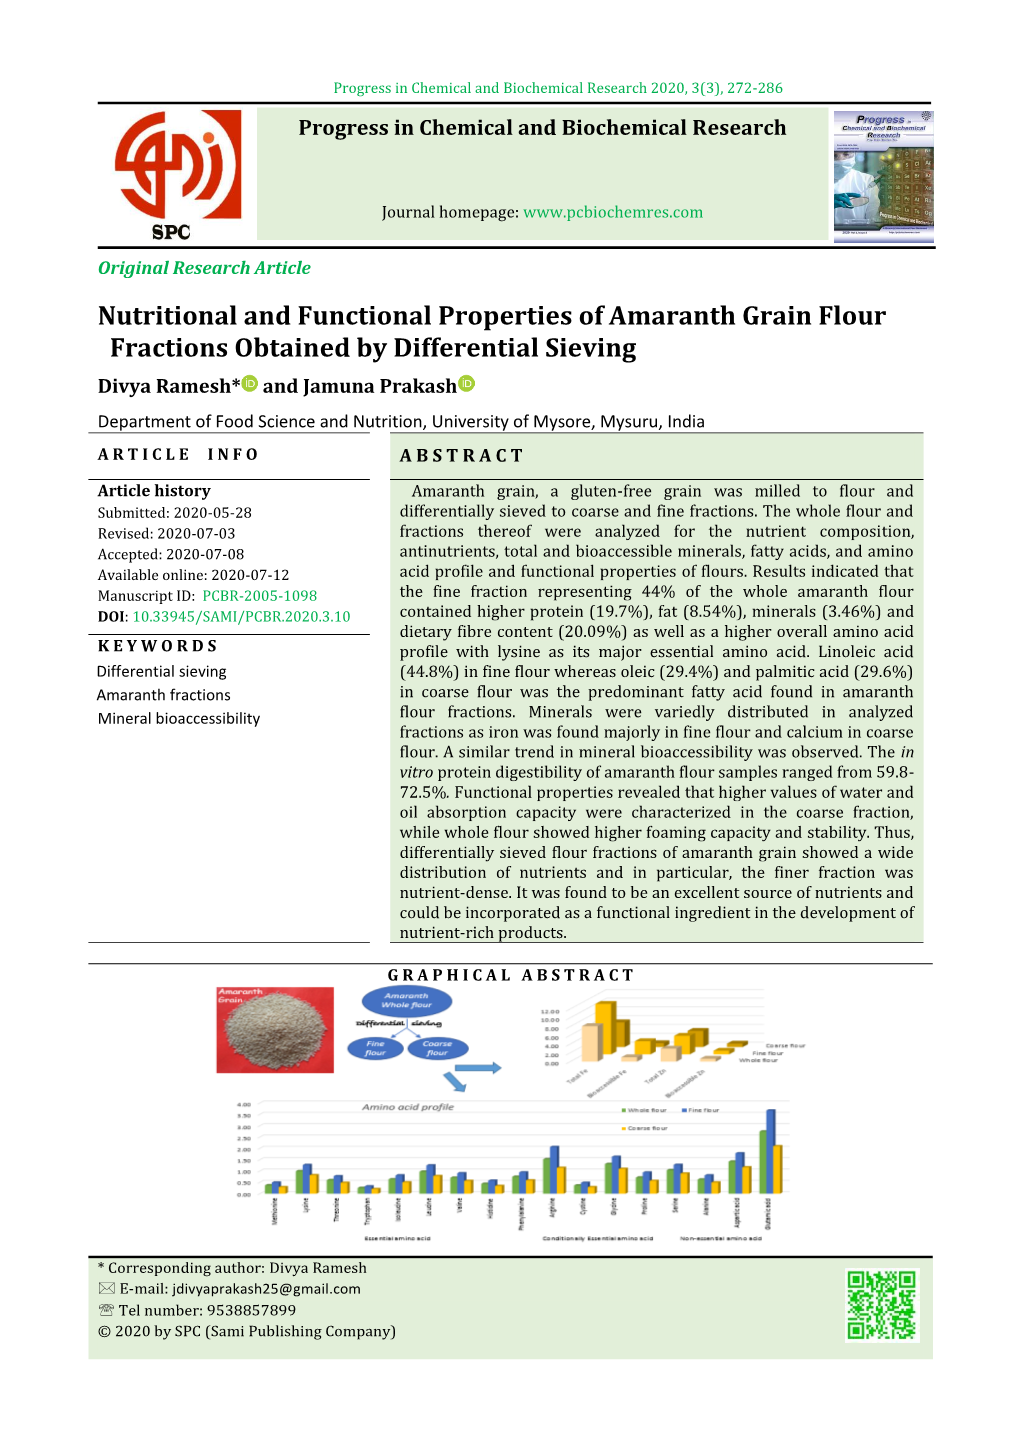 Nutritional and Functional Properties of Amaranth Grain Flour Fractions